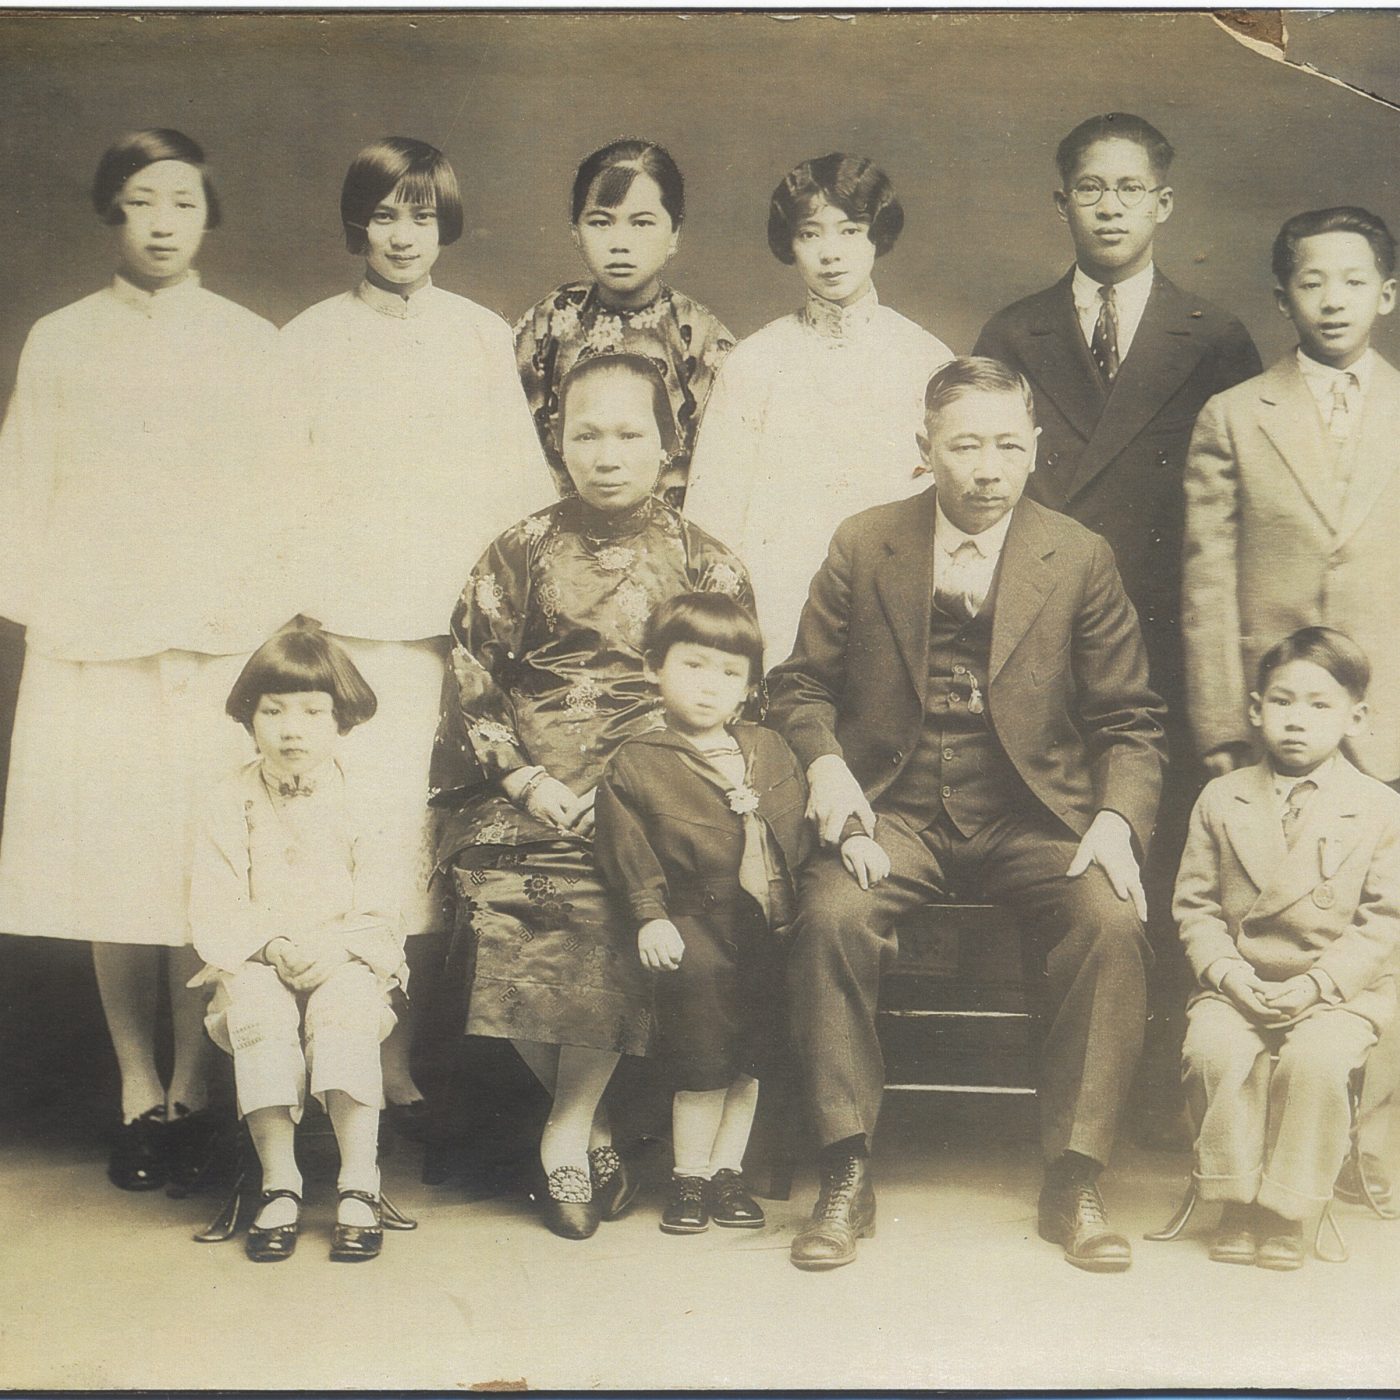 Family Picture Taken 1927 in Portland, Oregon. Courtesy of Hazel Ying Lee & Frances M. Tong, Museum of Chinese in America (MOCA) Collection. 